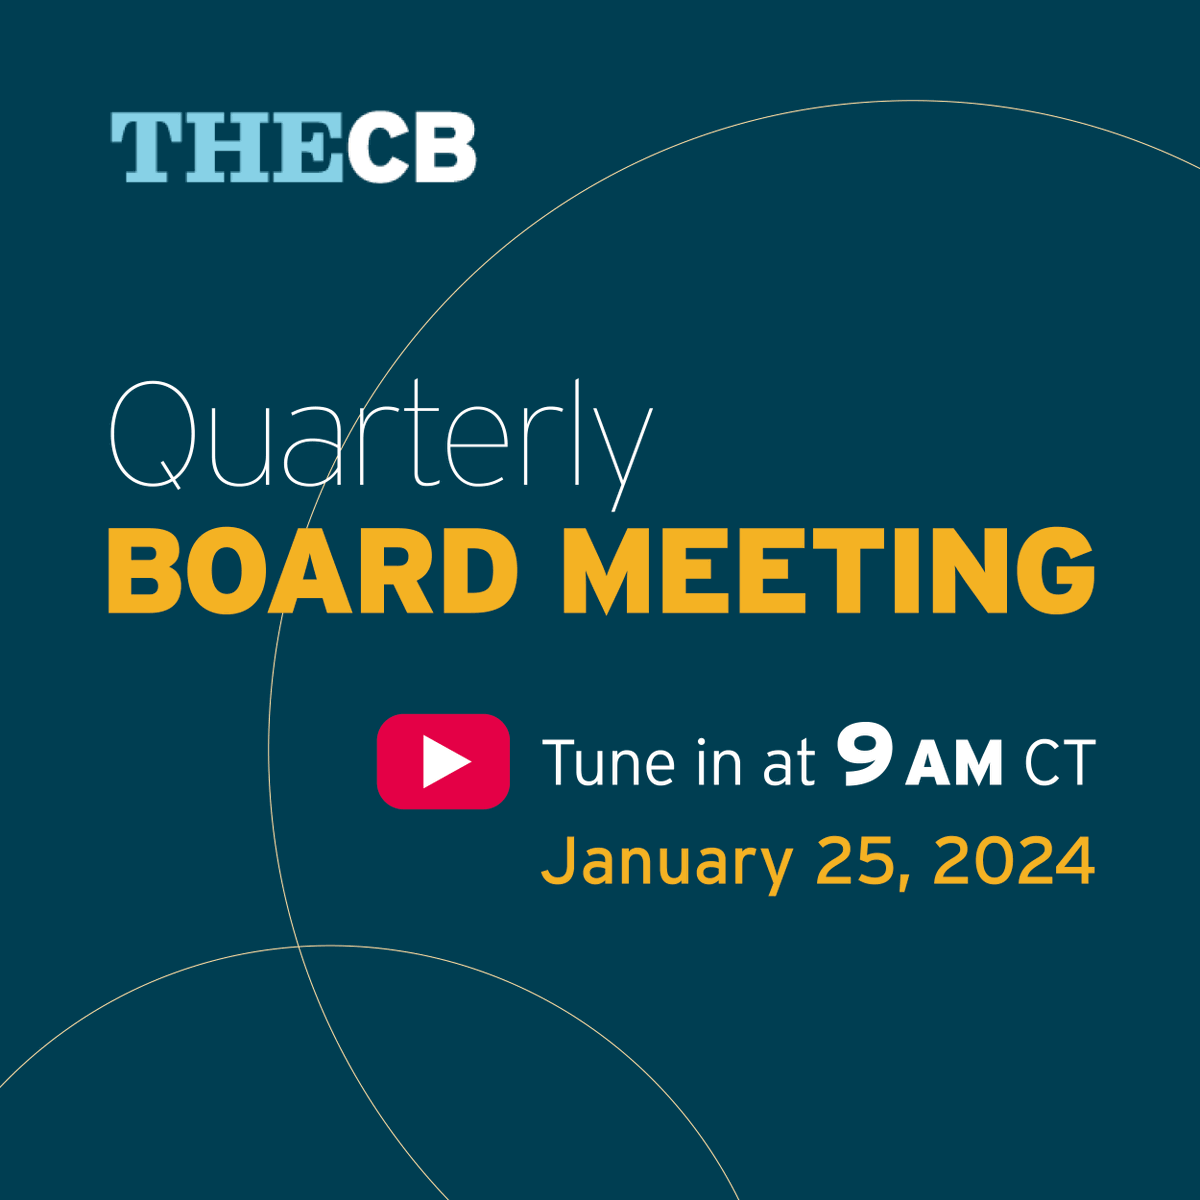 Watch or listen to our first board meeting of the year! We'll share an update on Building a Talent Strong Texas and discuss program updates and approvals. ▶️ youtube.com/@TxHigherEd